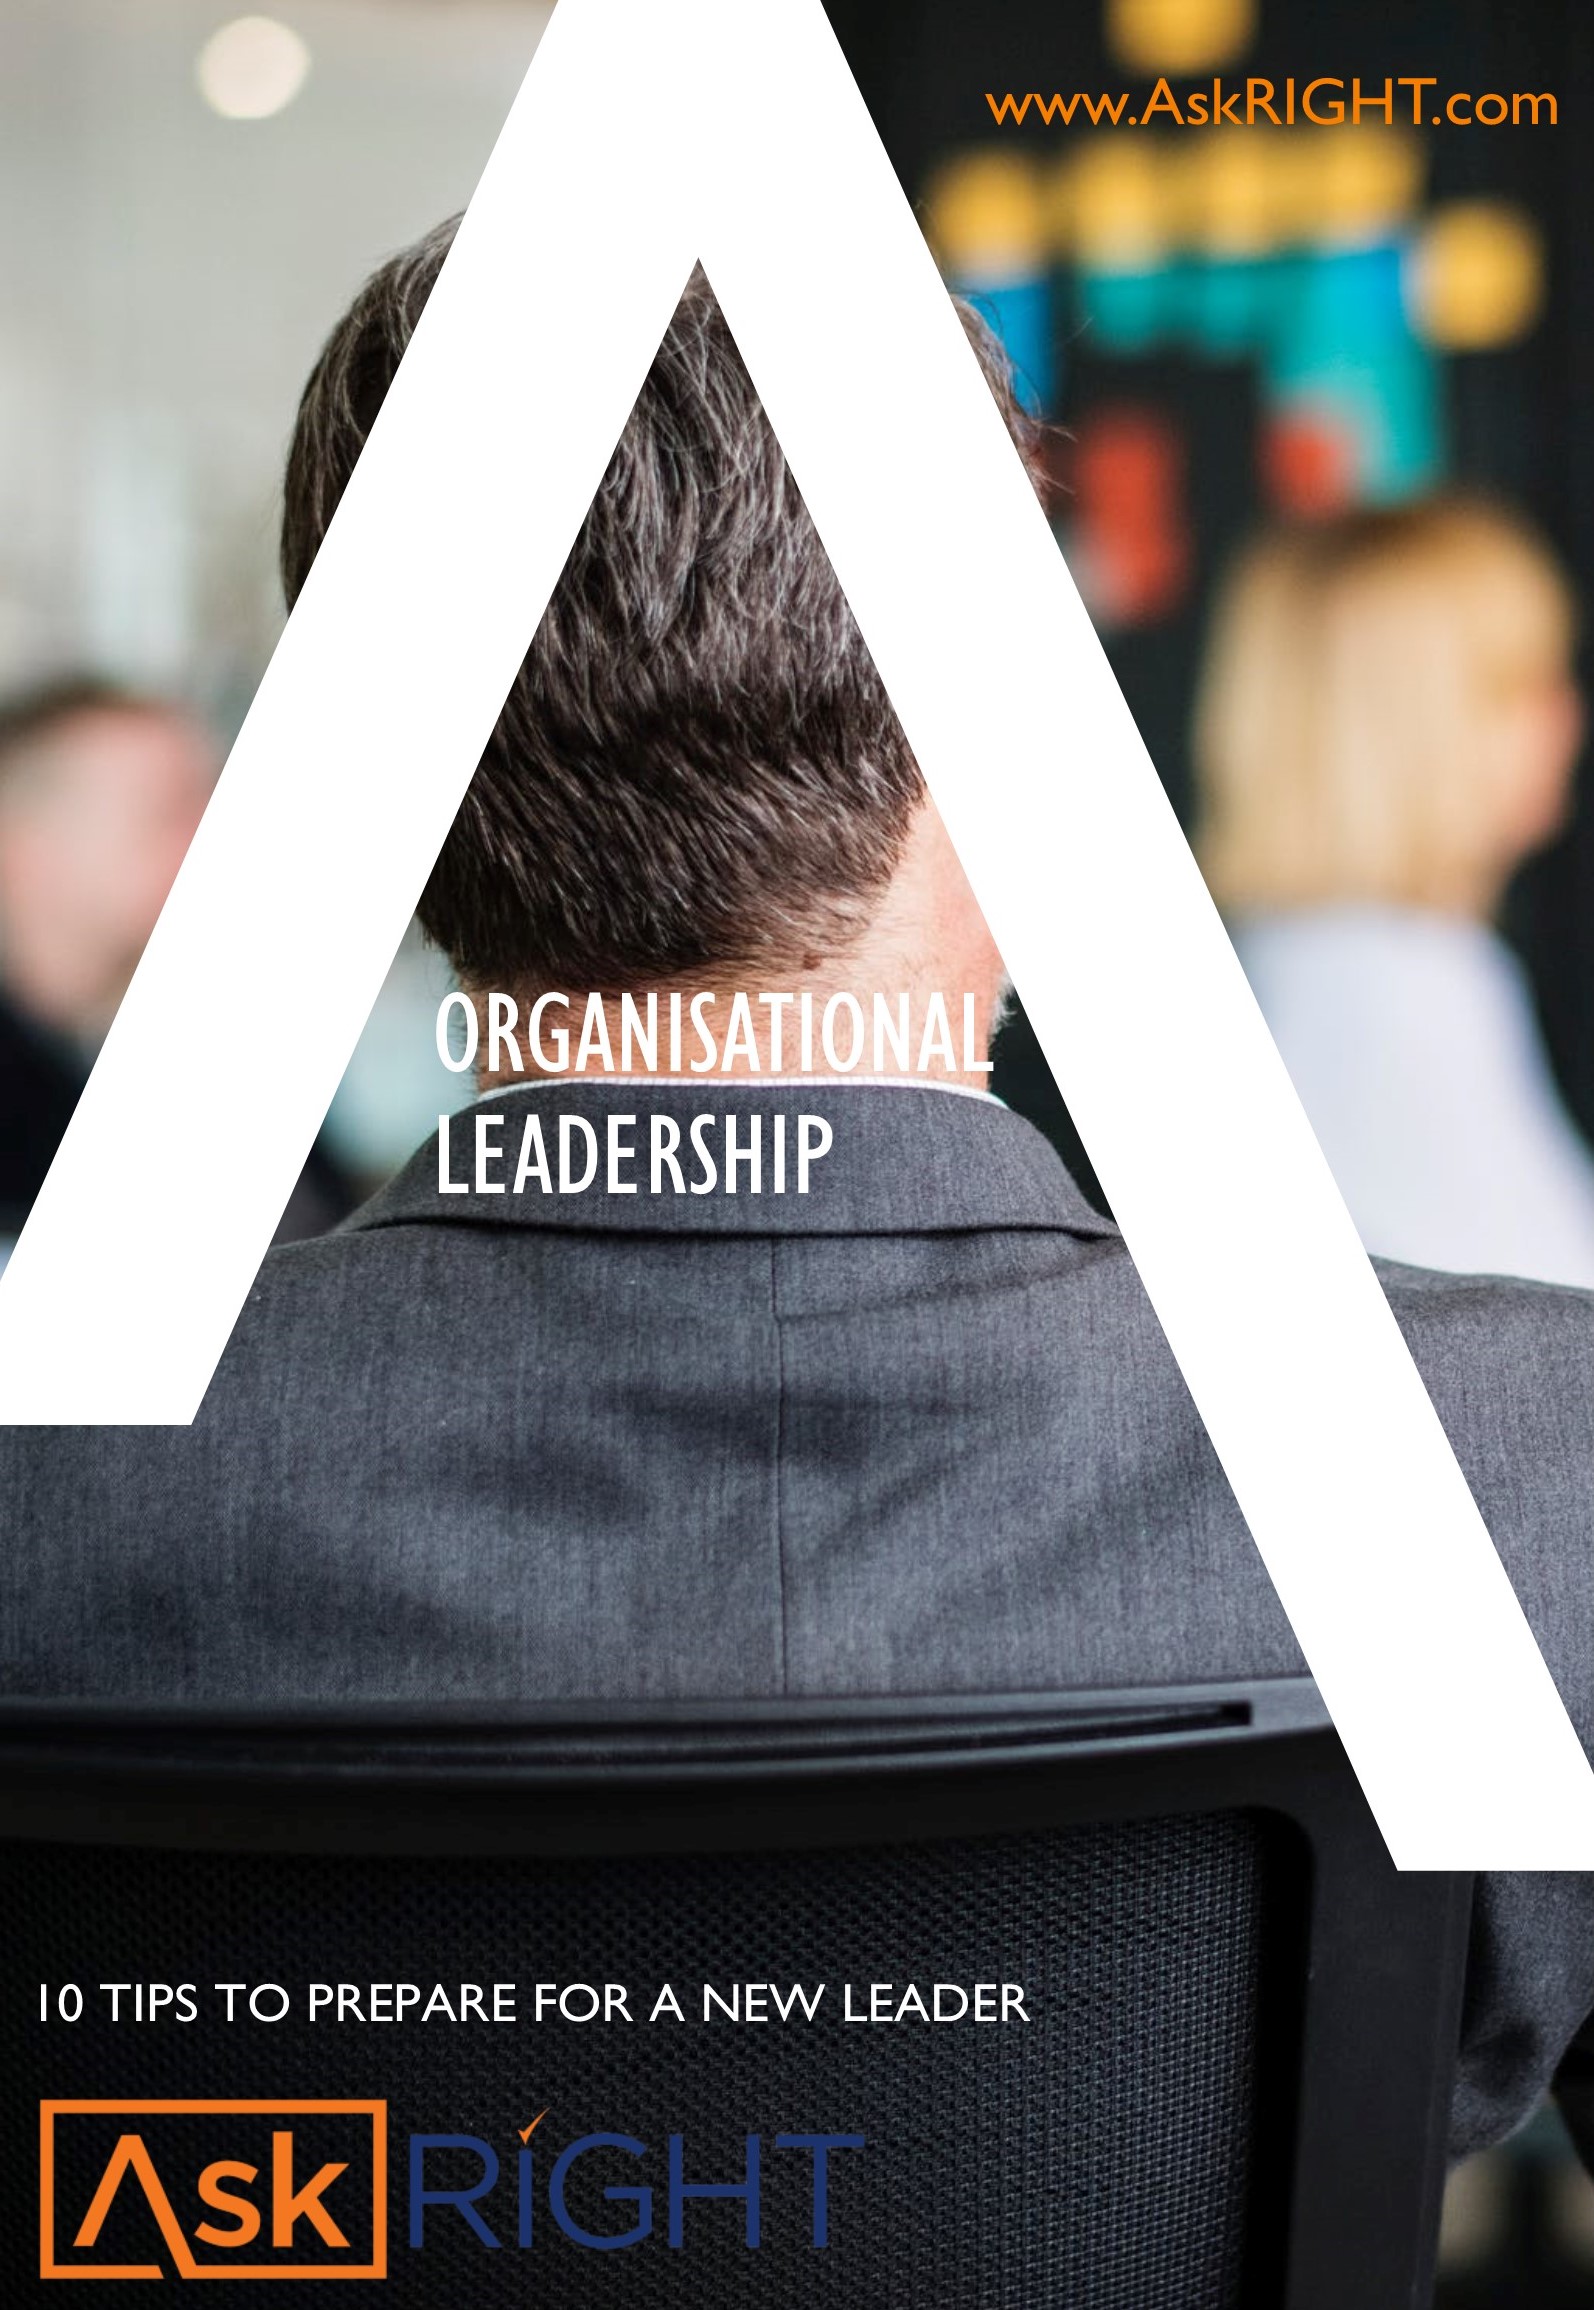 Organisational Leadership - 10 tips to prepare for a new leader